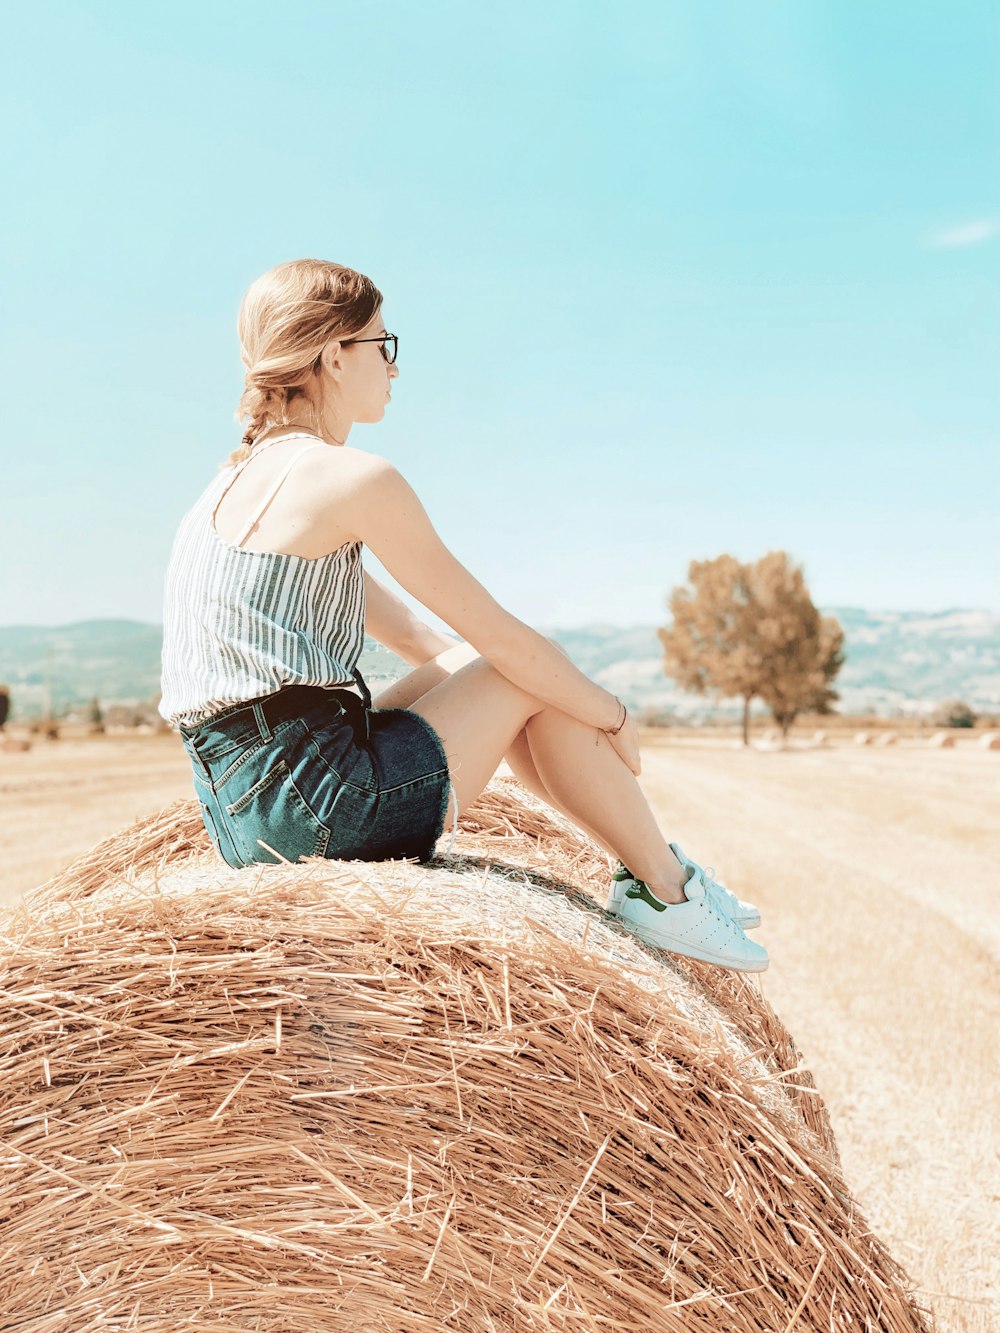 woman in white top sitting on hay